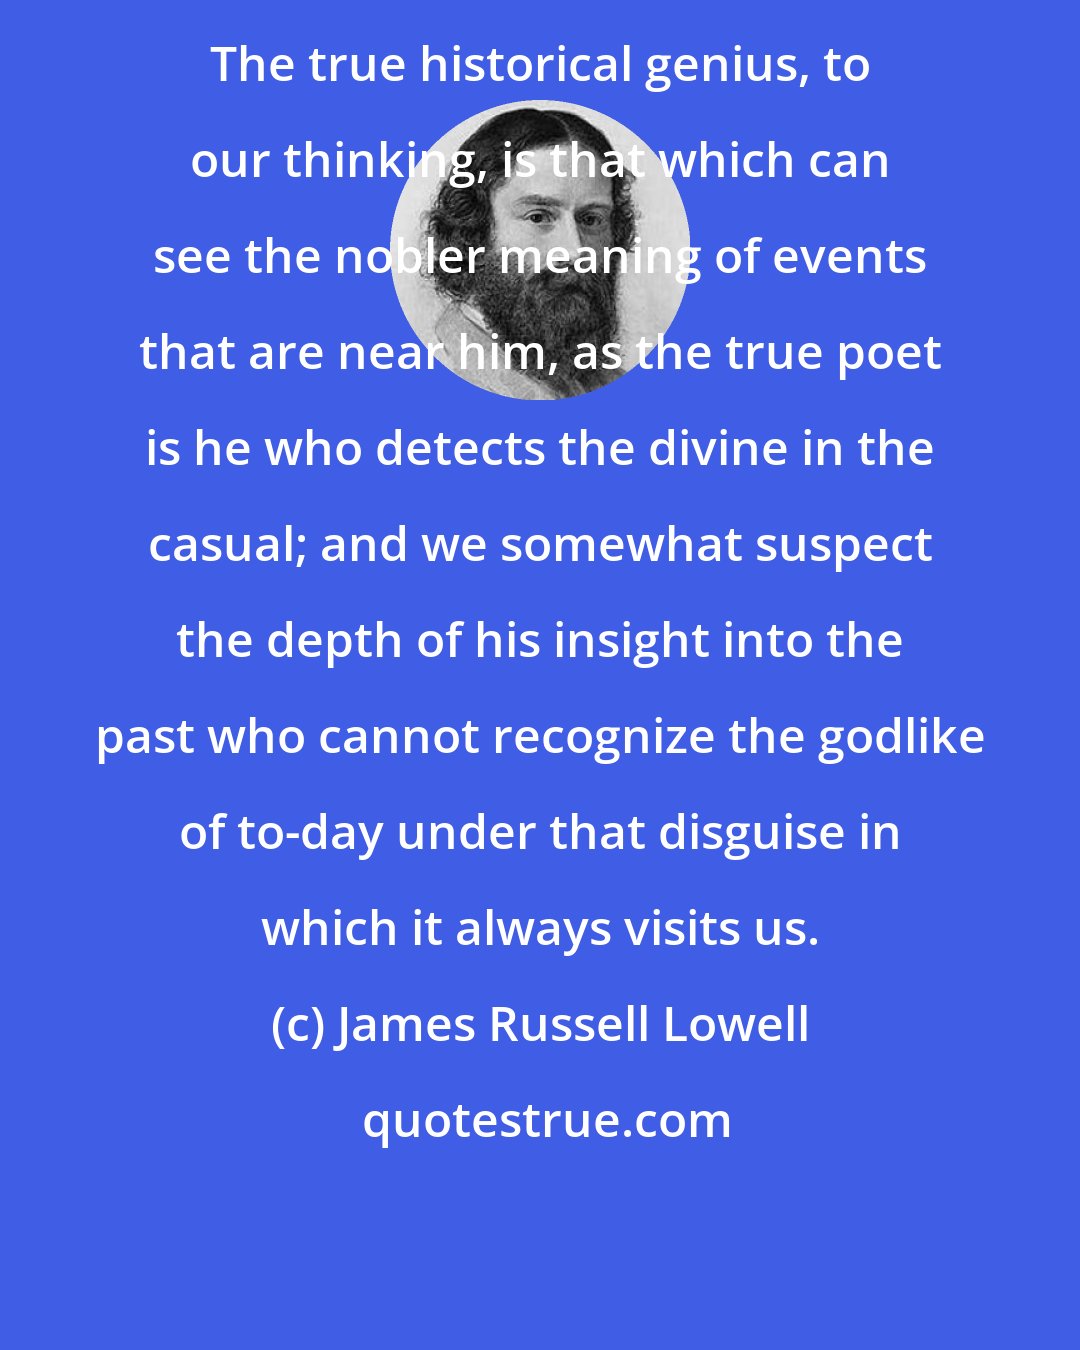 James Russell Lowell: The true historical genius, to our thinking, is that which can see the nobler meaning of events that are near him, as the true poet is he who detects the divine in the casual; and we somewhat suspect the depth of his insight into the past who cannot recognize the godlike of to-day under that disguise in which it always visits us.